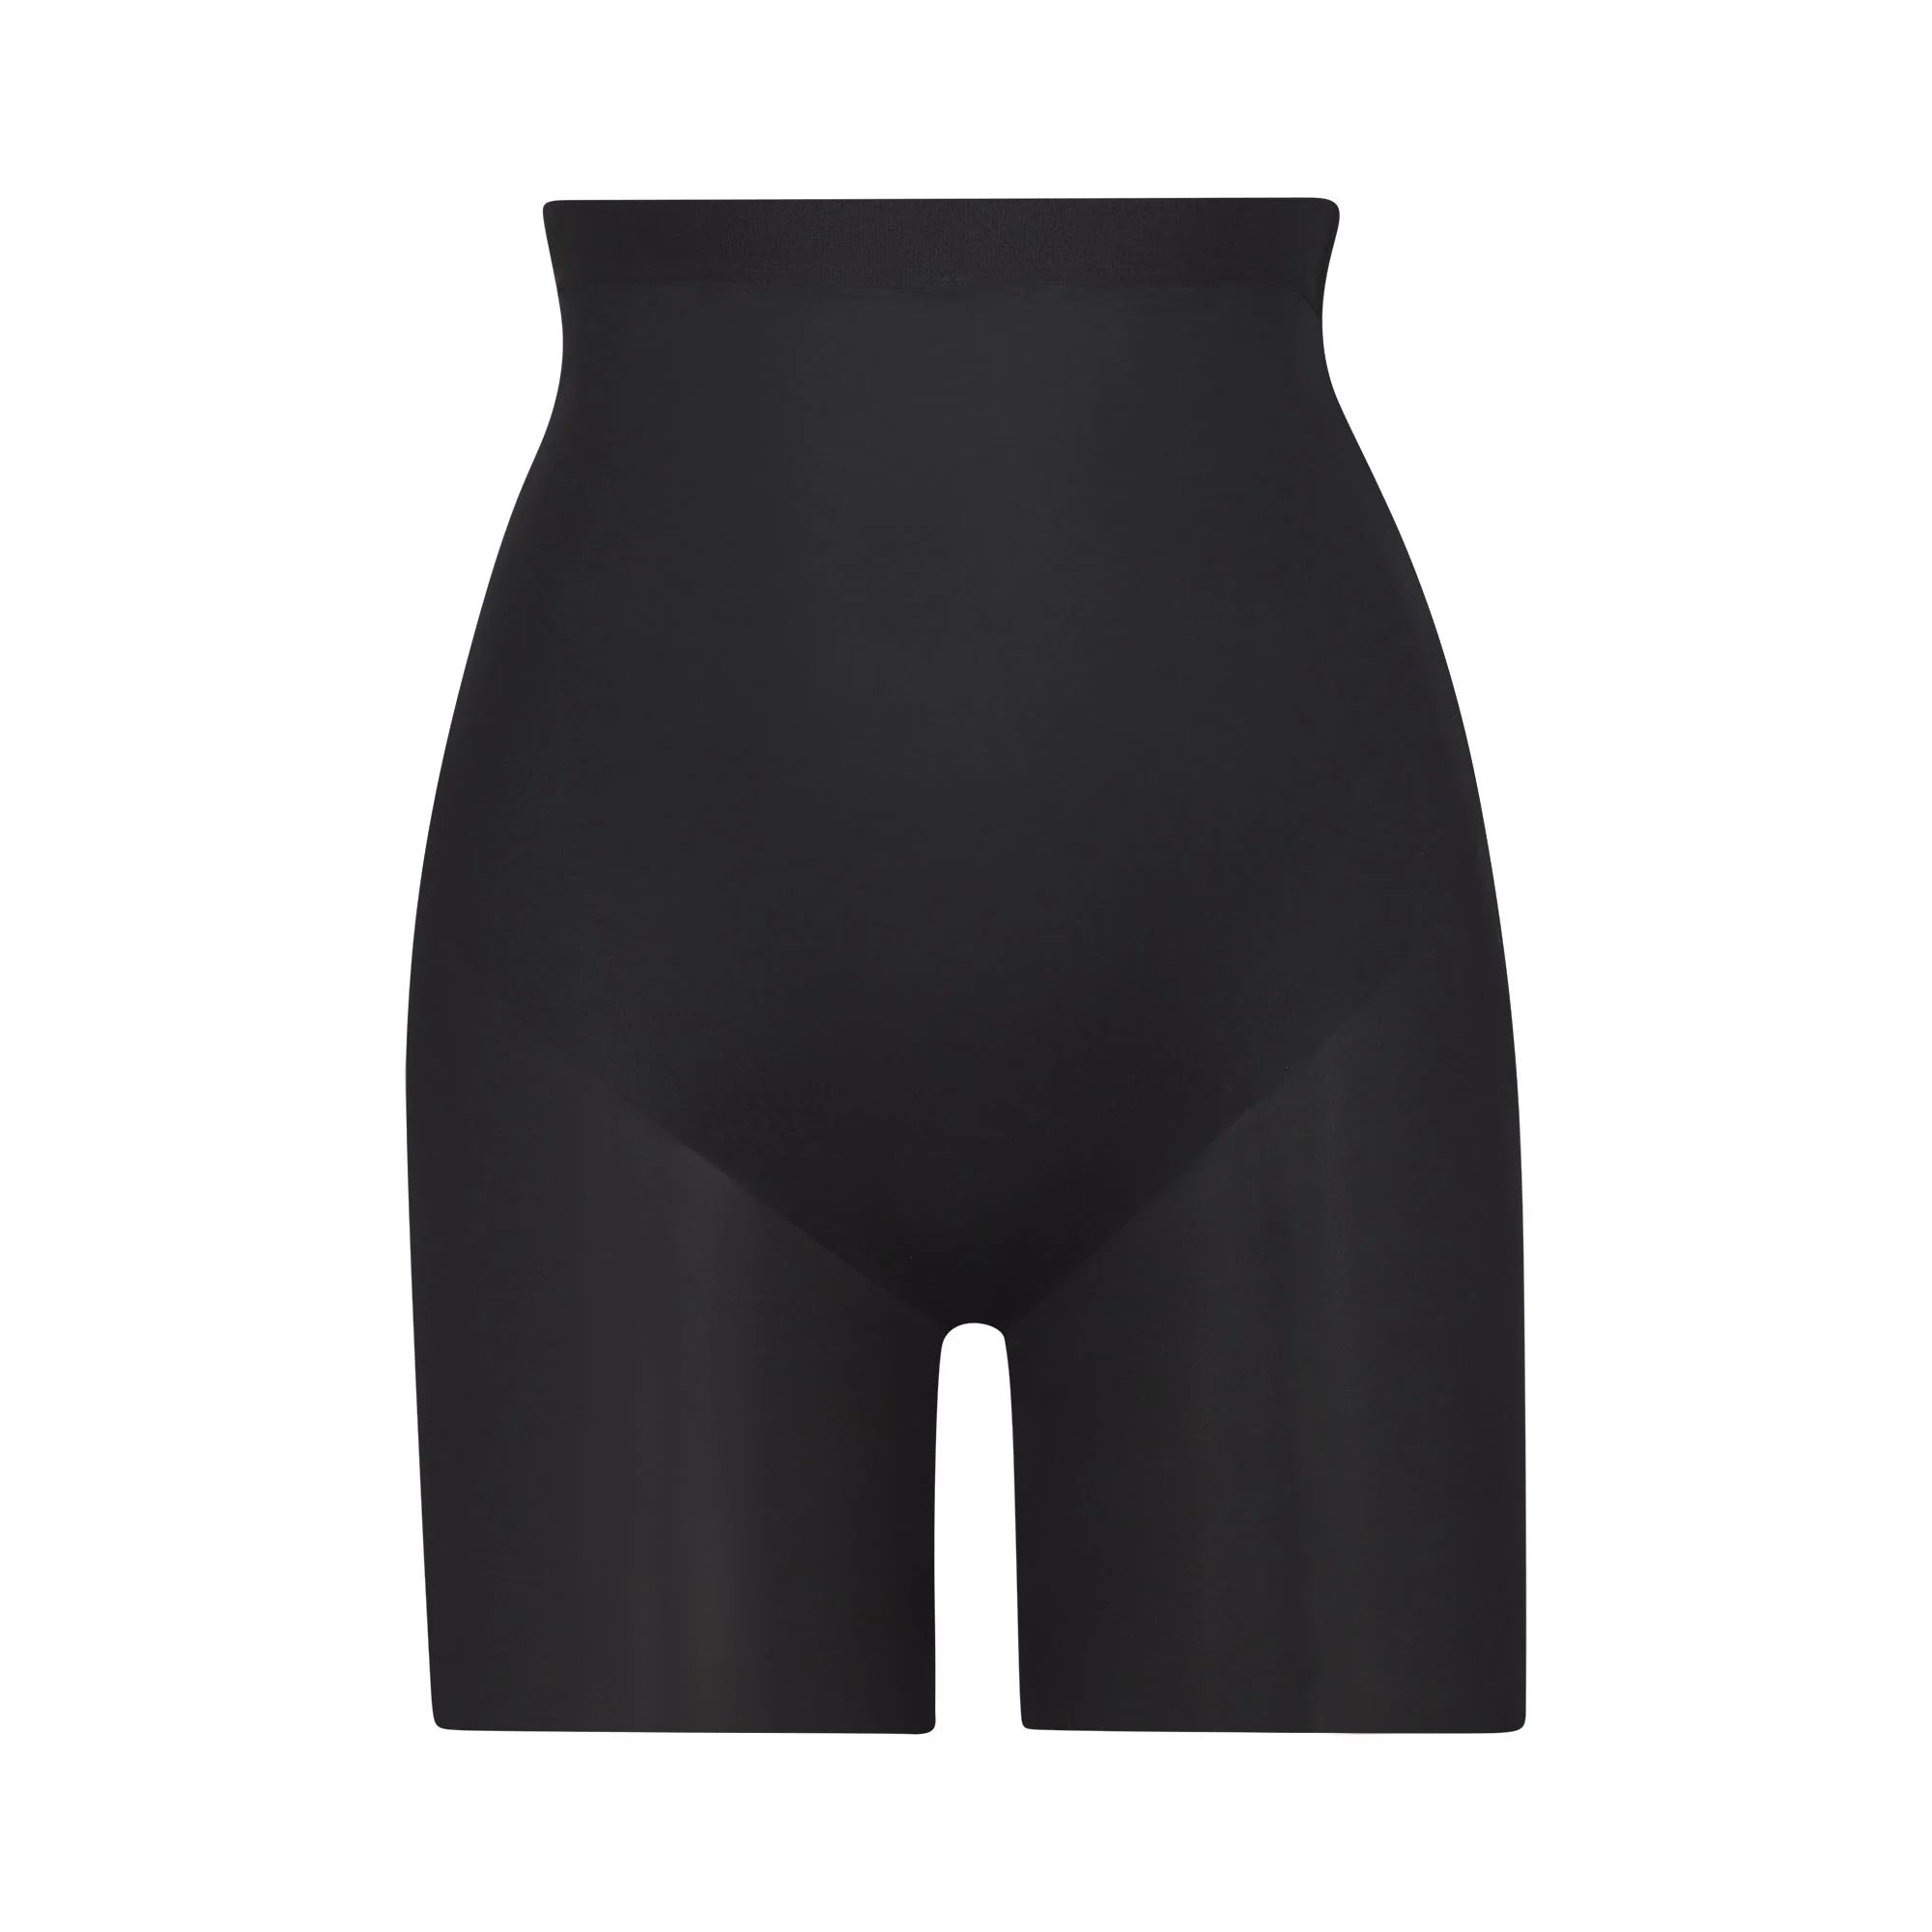 BARELY THERE LOW BACK SHORT | SKIMS (US)